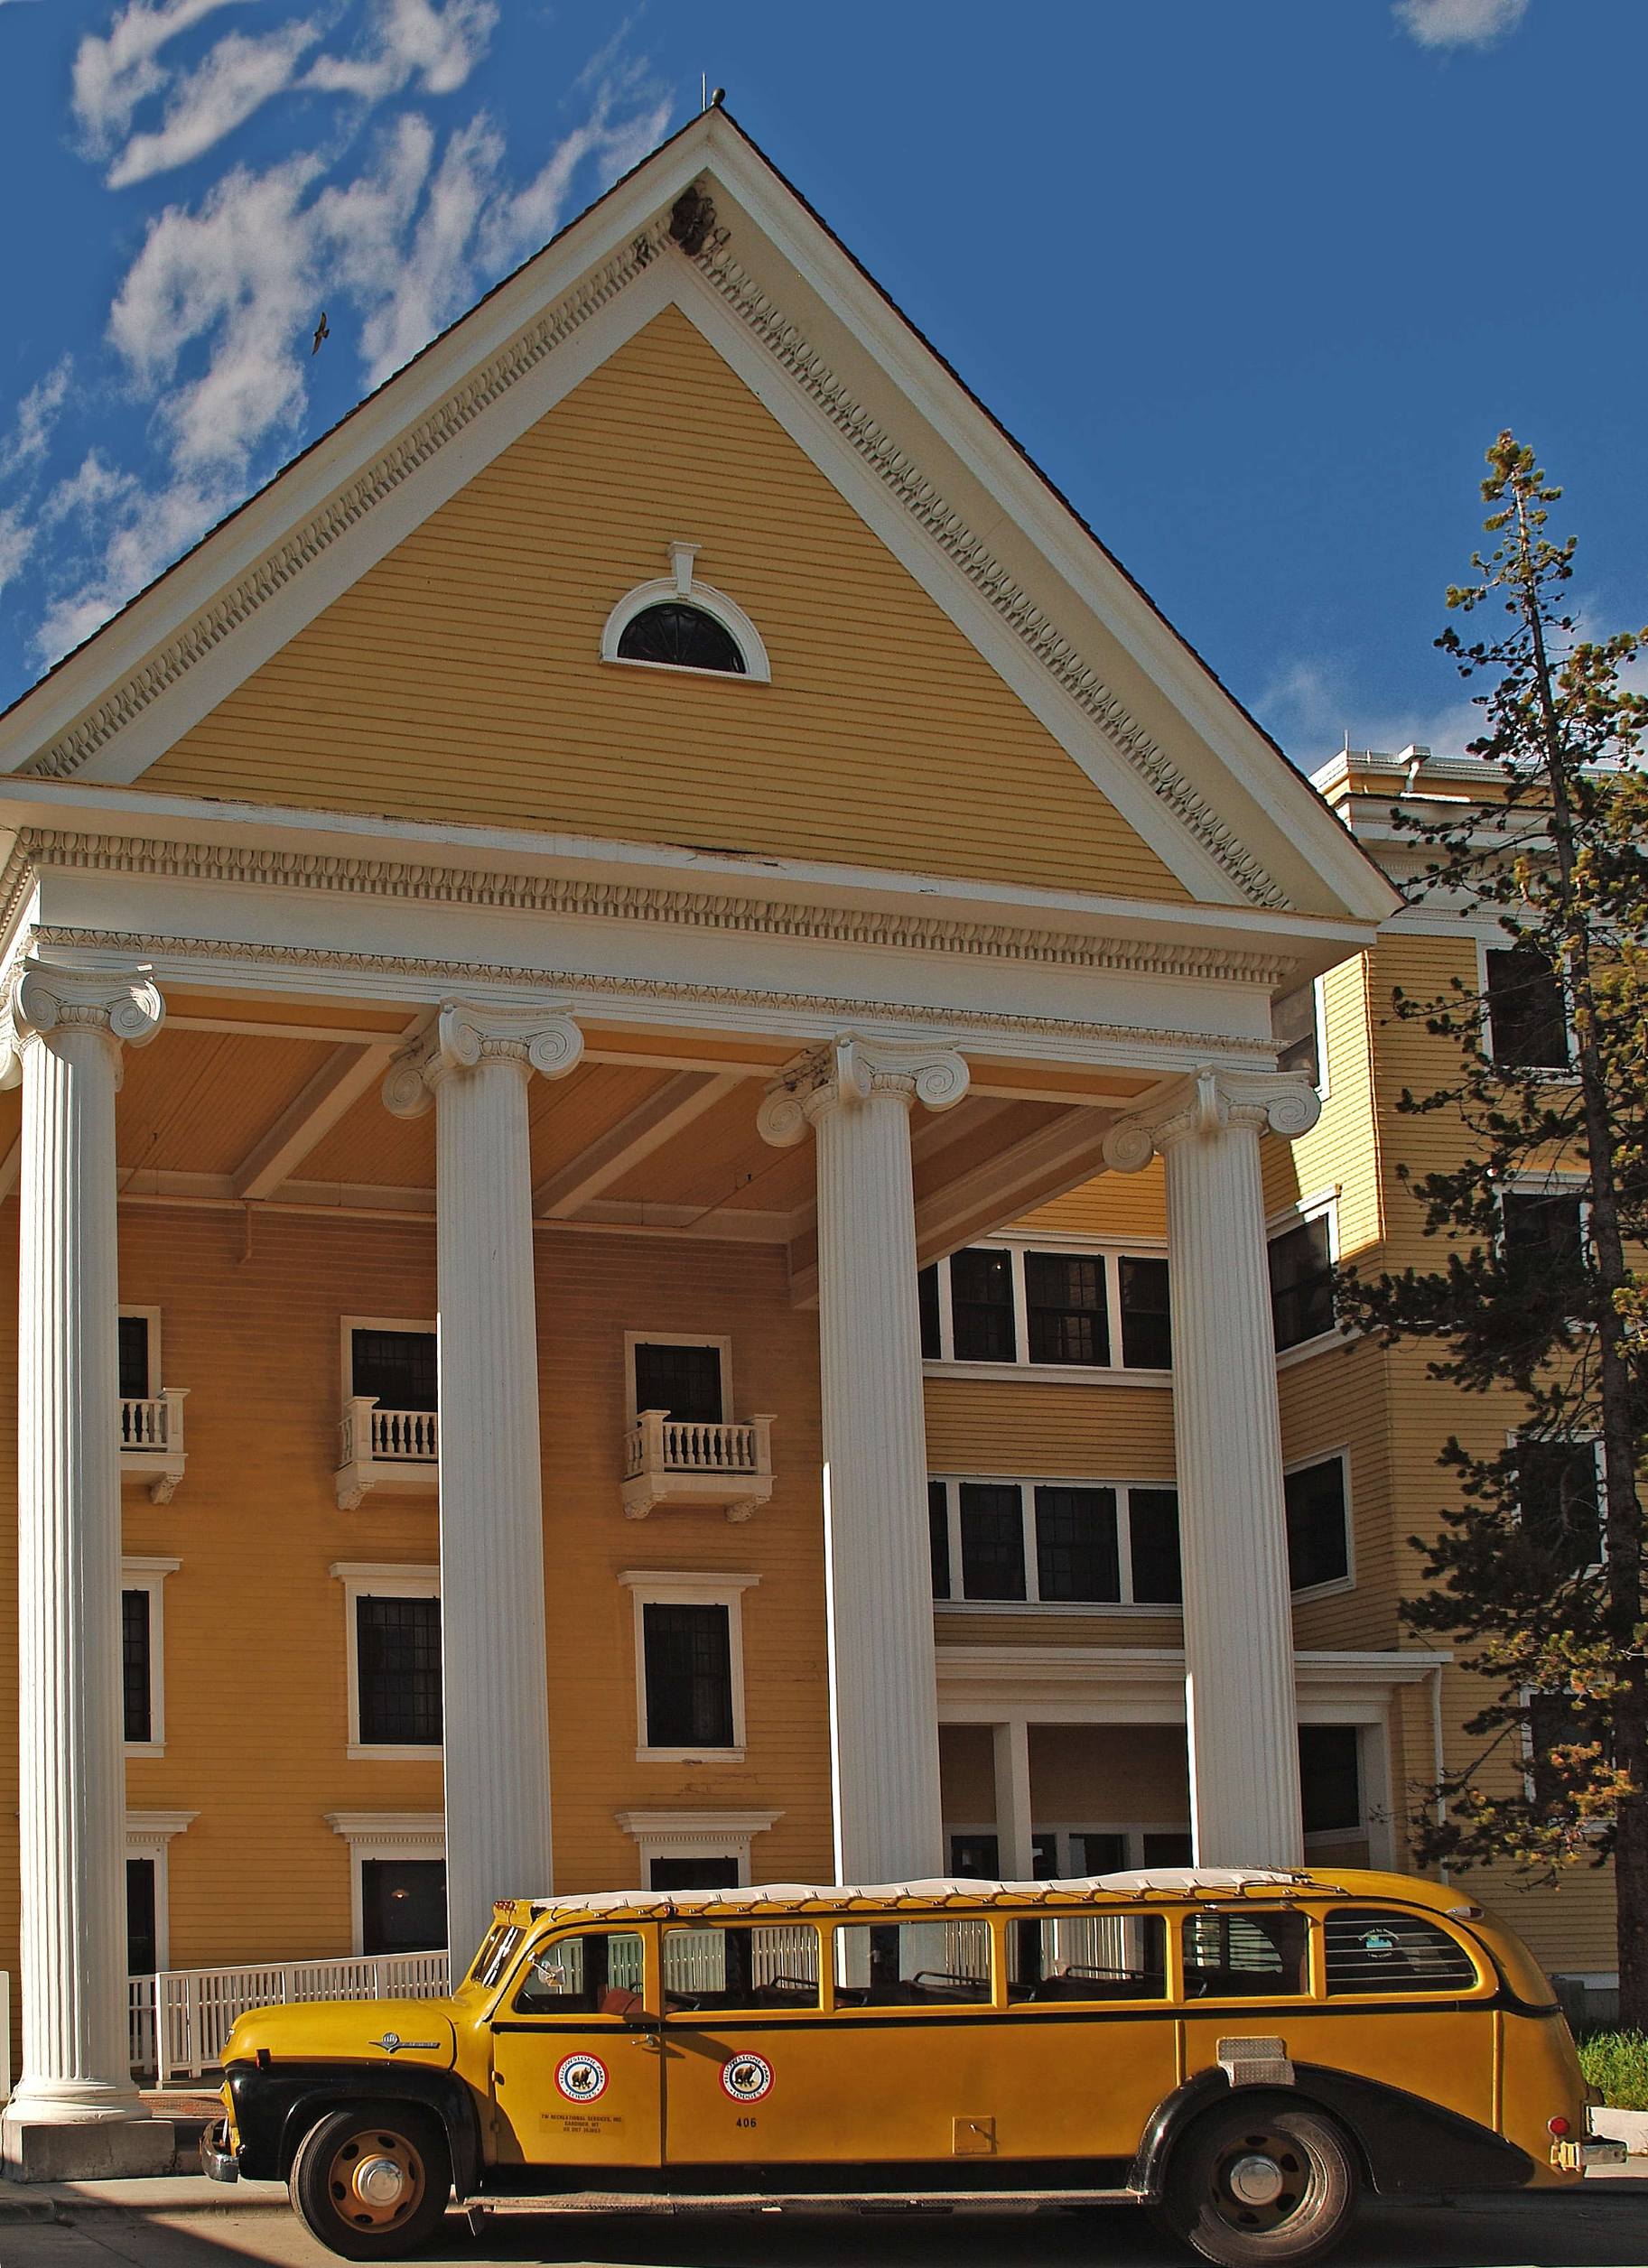 Several Historic Yellow Bus and motorcoach tours offer departures from Lake Yellowstone Hotel throughout the summer season.